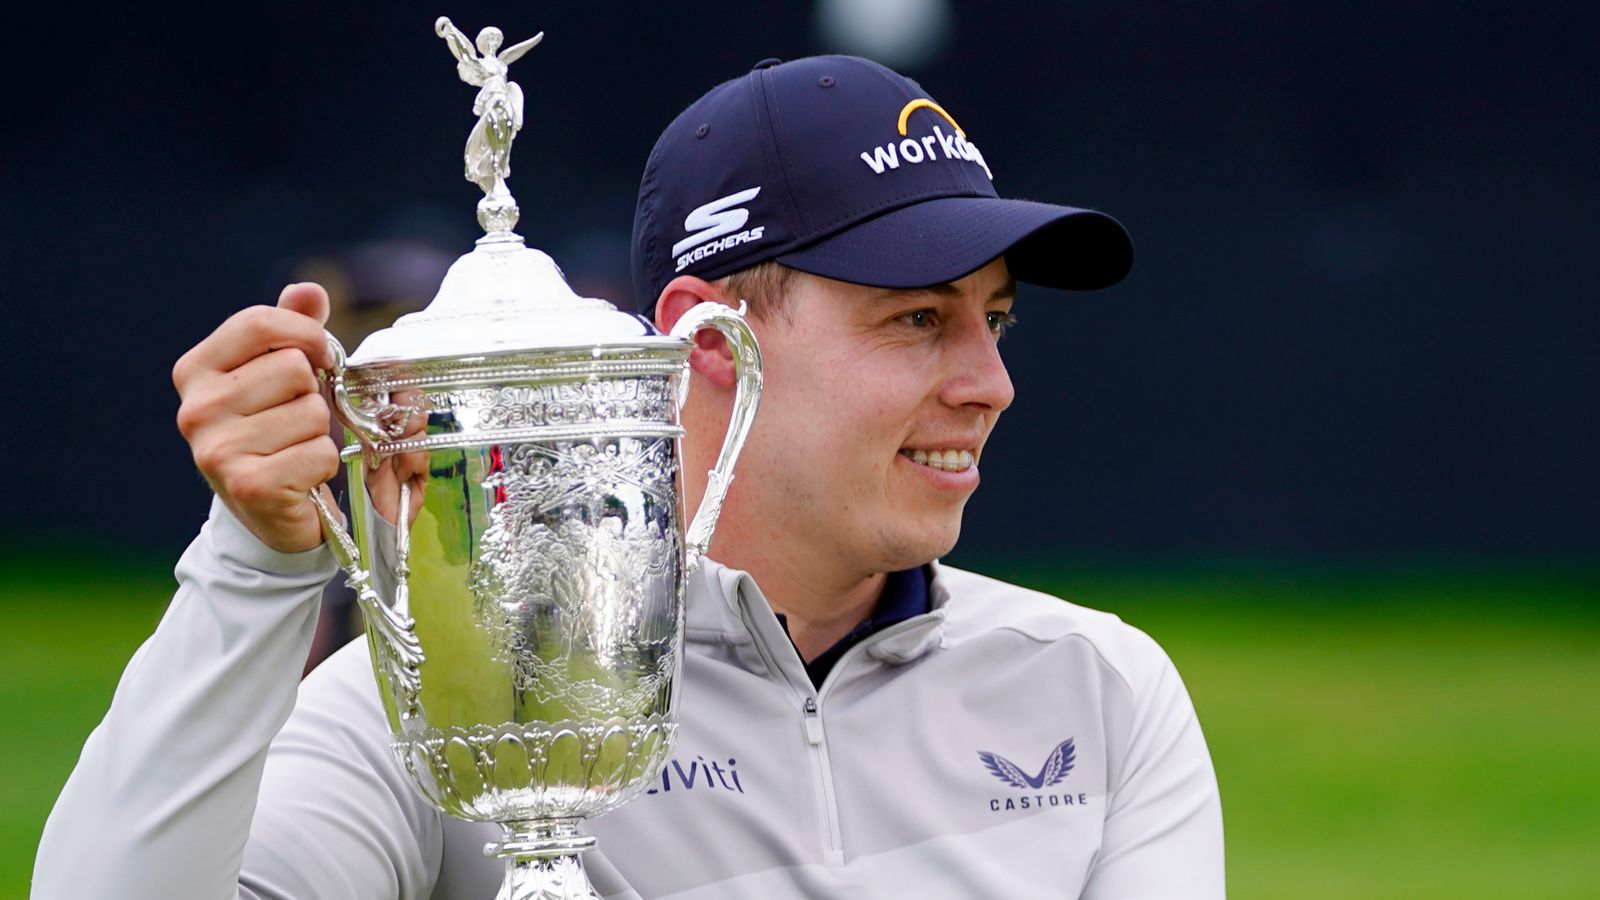 US Open champion Matthew Fitzpatrick say it is ‘incredible’ to share honour with Jack Nicklaus